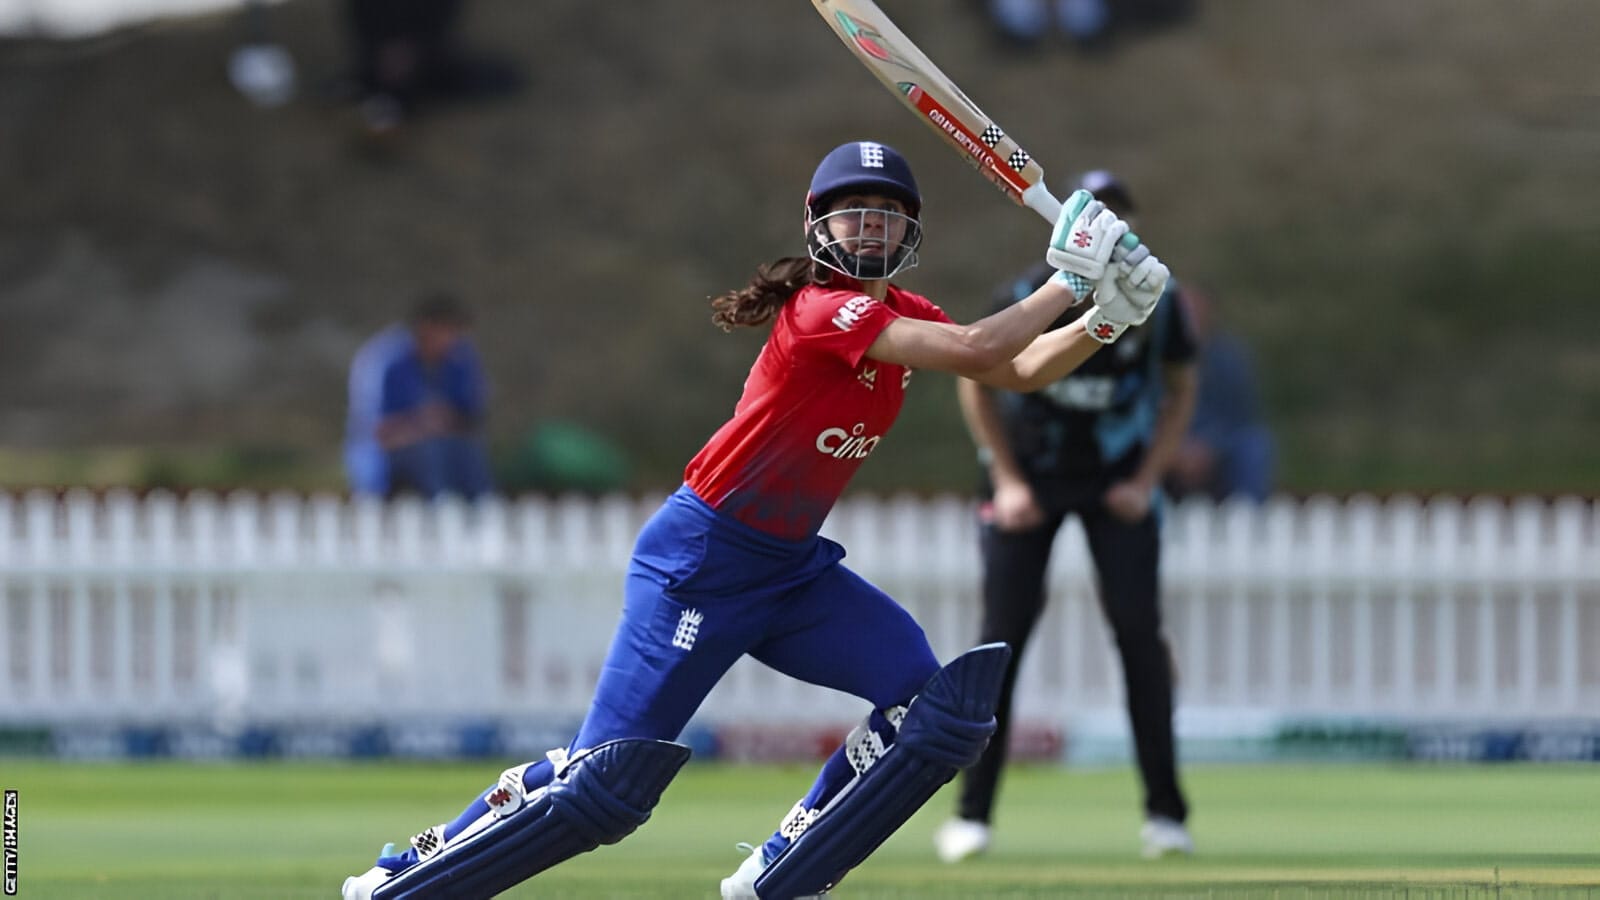 Maia Bouchier scored 91 runs in the fourth T20 match, securing the series win for New Zealand against England